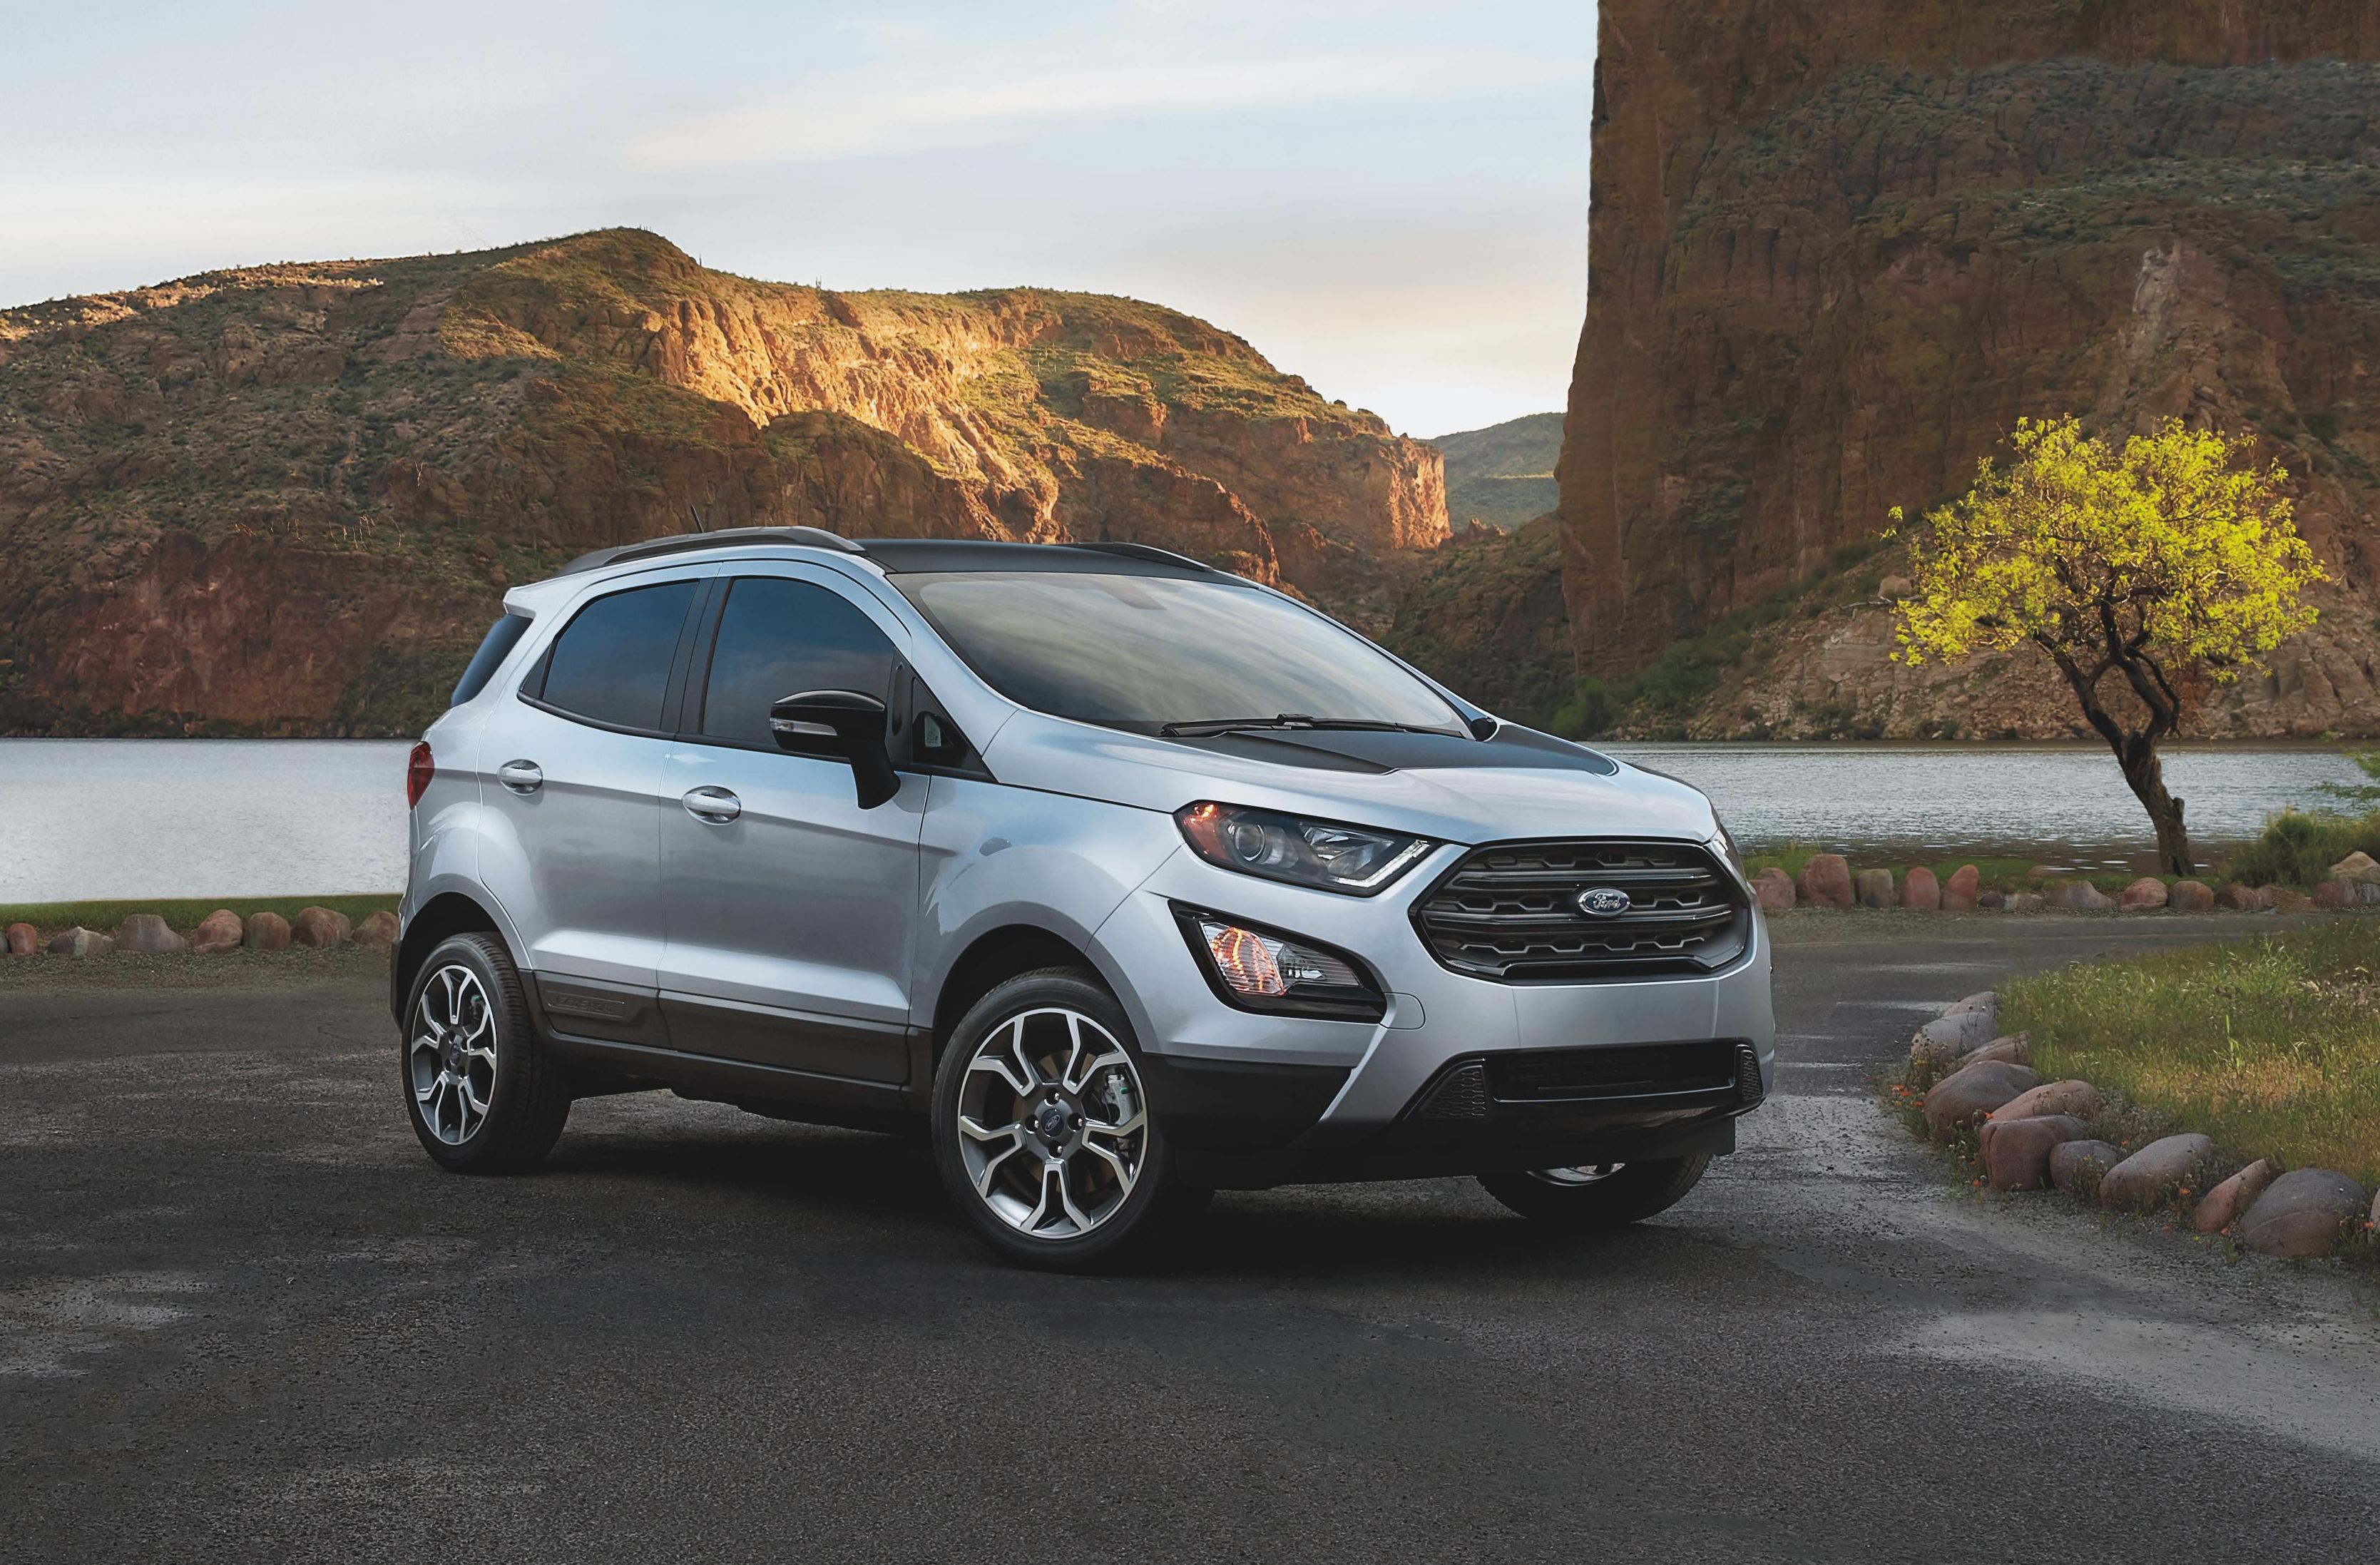 2019 Ford EcoSport 1.5 Trend Review